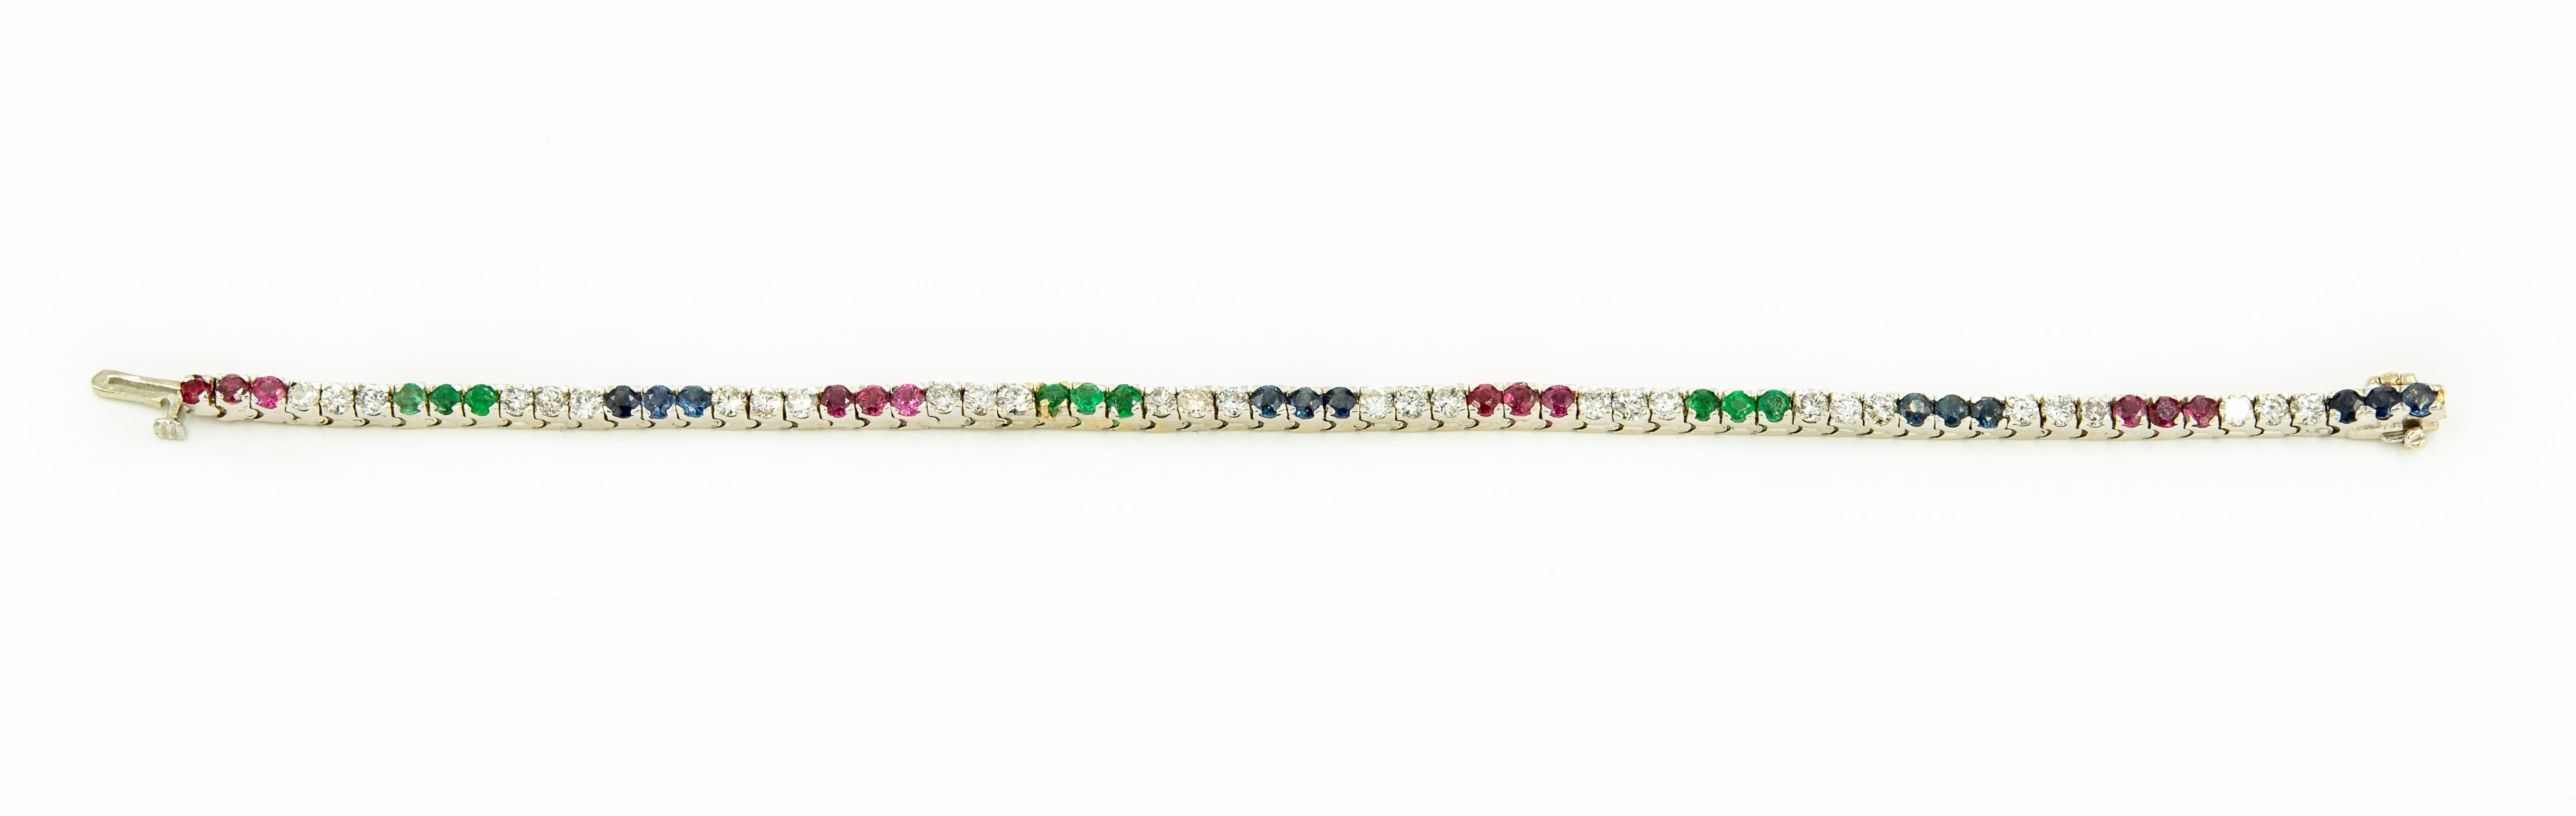 Classic line or tennis 14k white gold line or tennis bracelet with 3 diamonds spaced between 3 rubies, emeralds or sapphires.  The clasp is a push button with a safety bar on the underside.  